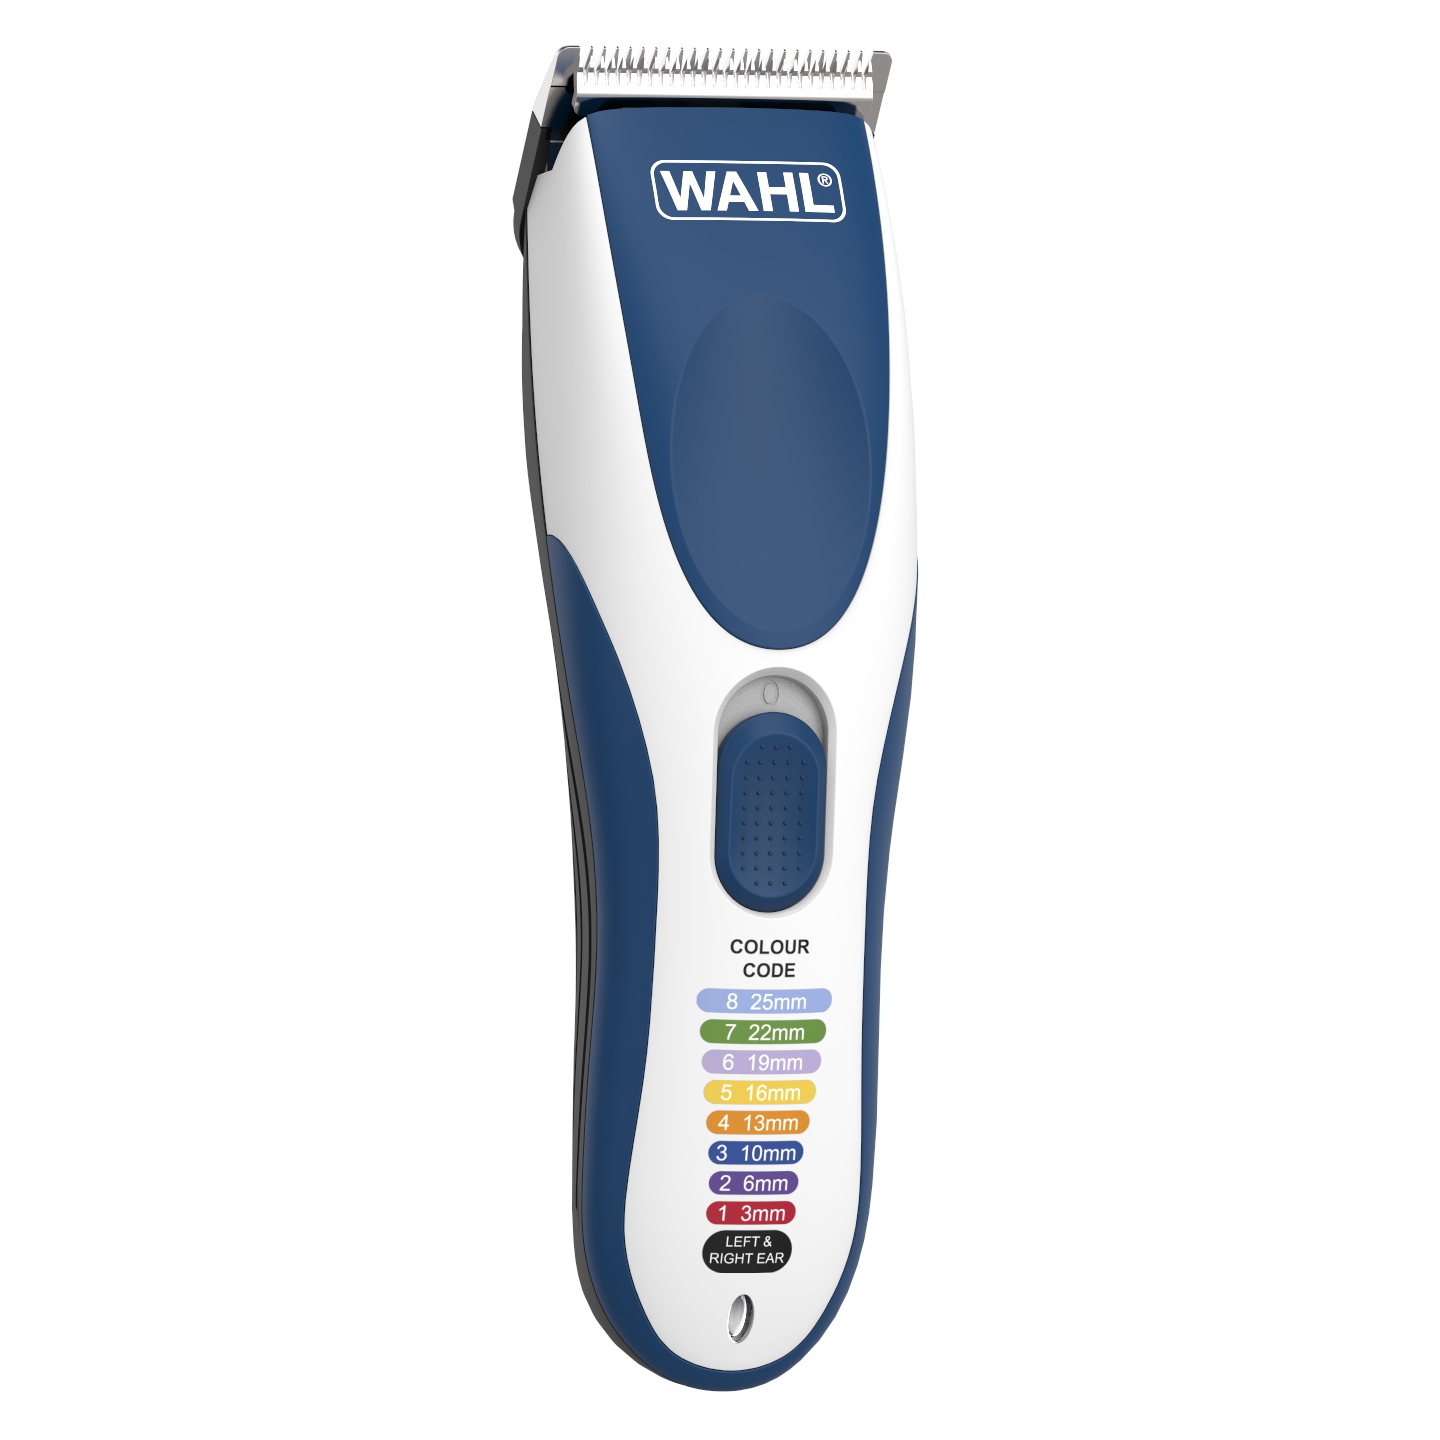 wahl colour pro style hair clipper